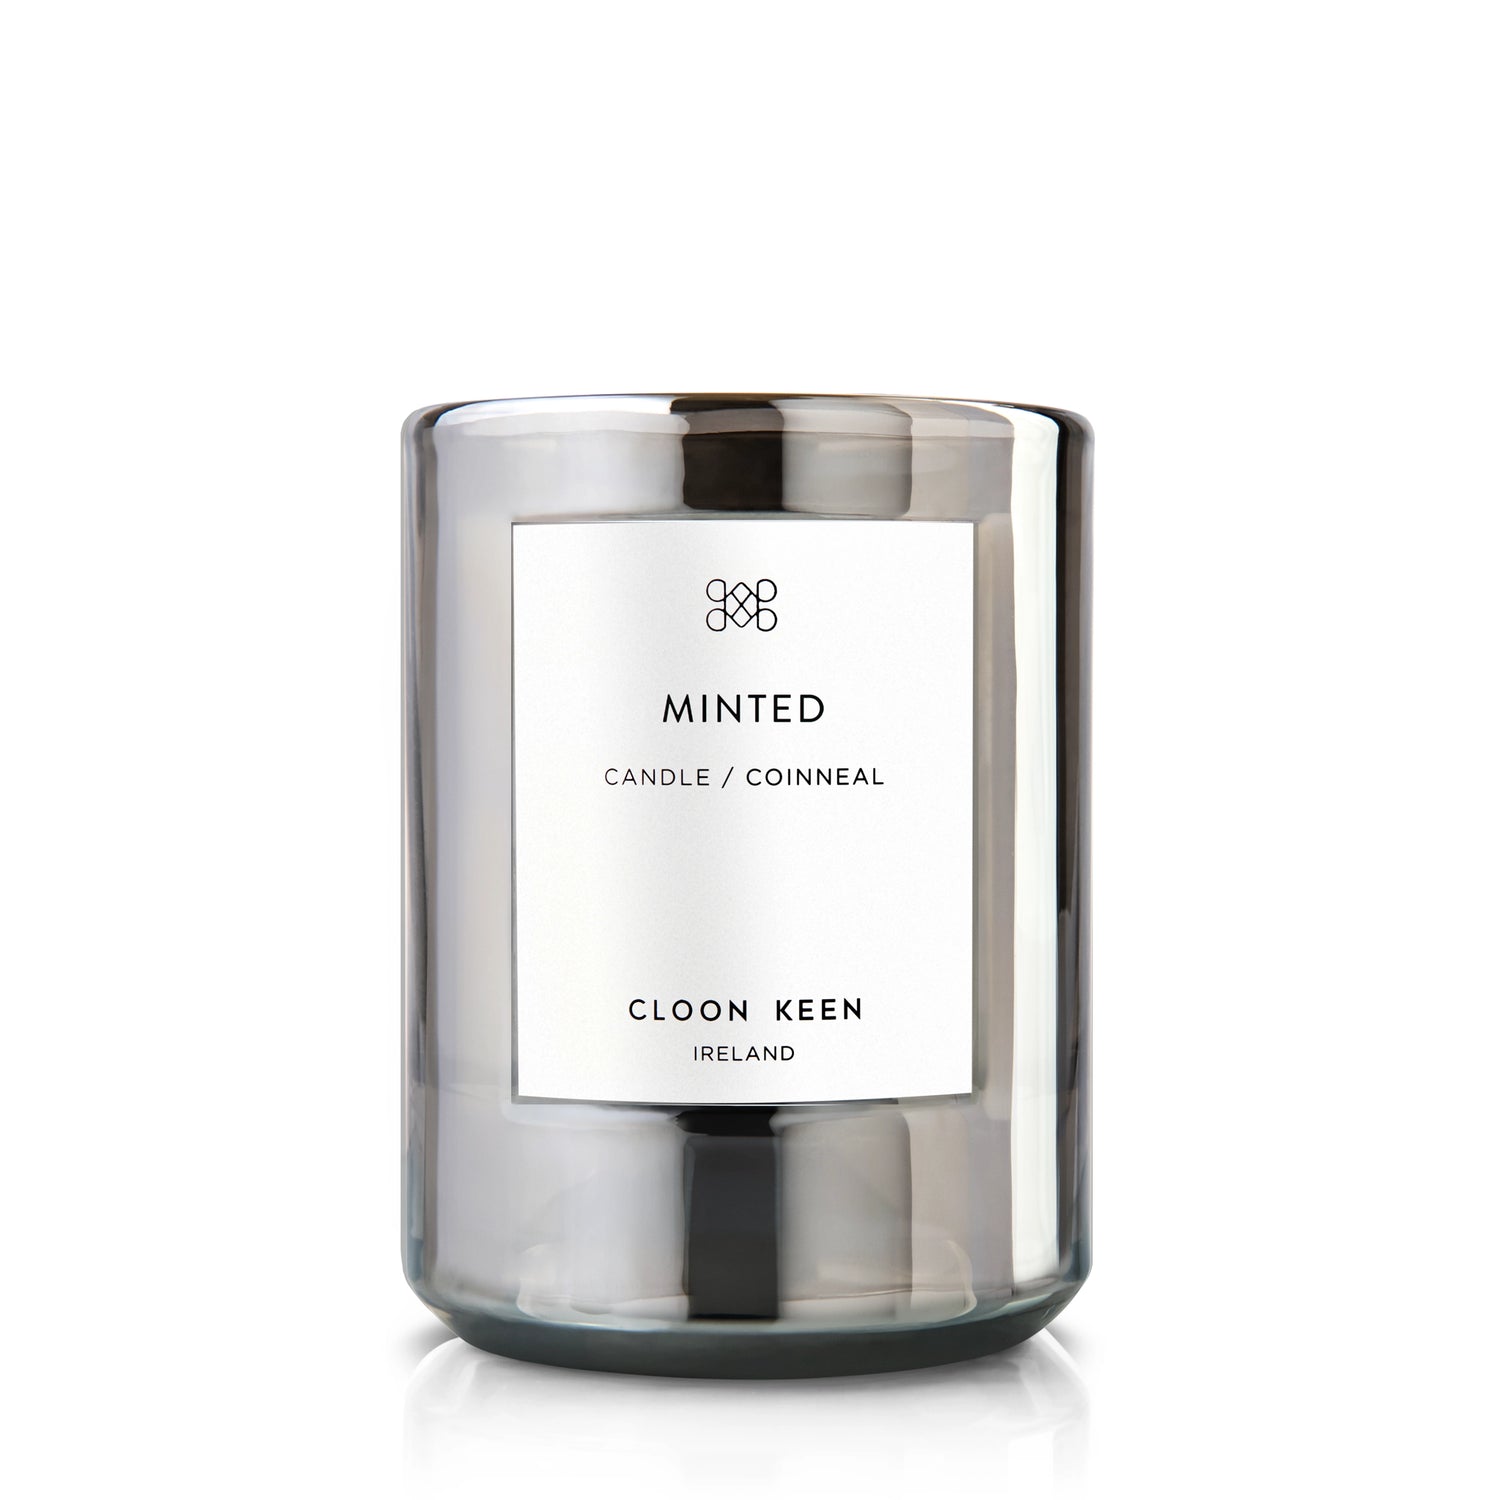 Discover the freshness of Cloon Keen Minted candle. Garden fresh mint, with ripened citrus fruit, sits on aromatic armoise to create a refreshing and modern impression.